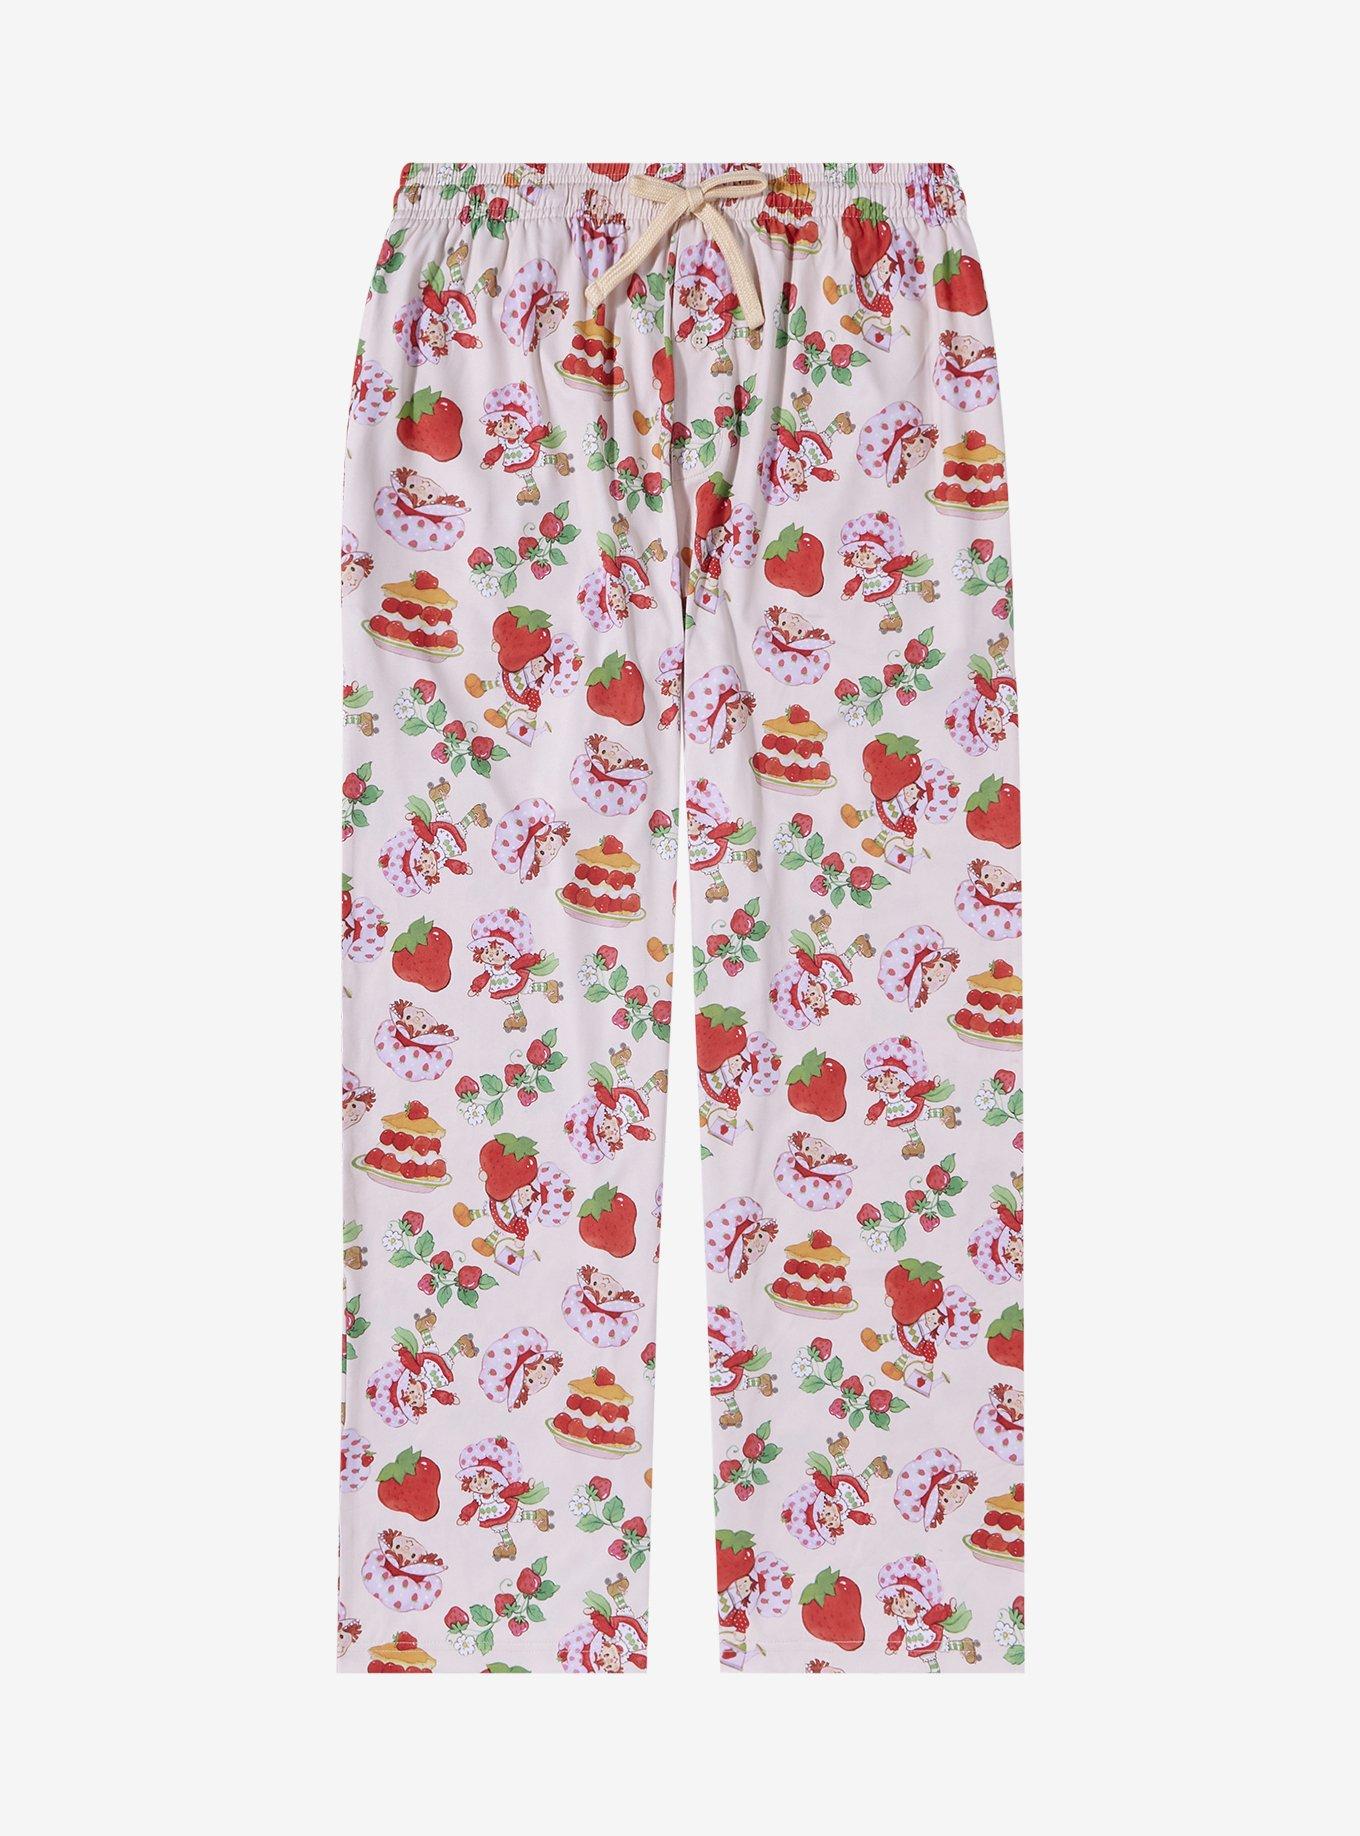 Strawberry Shortcake Icons Allover Print Sleep Pants - BoxLunch Exclusive, CREAM, hi-res